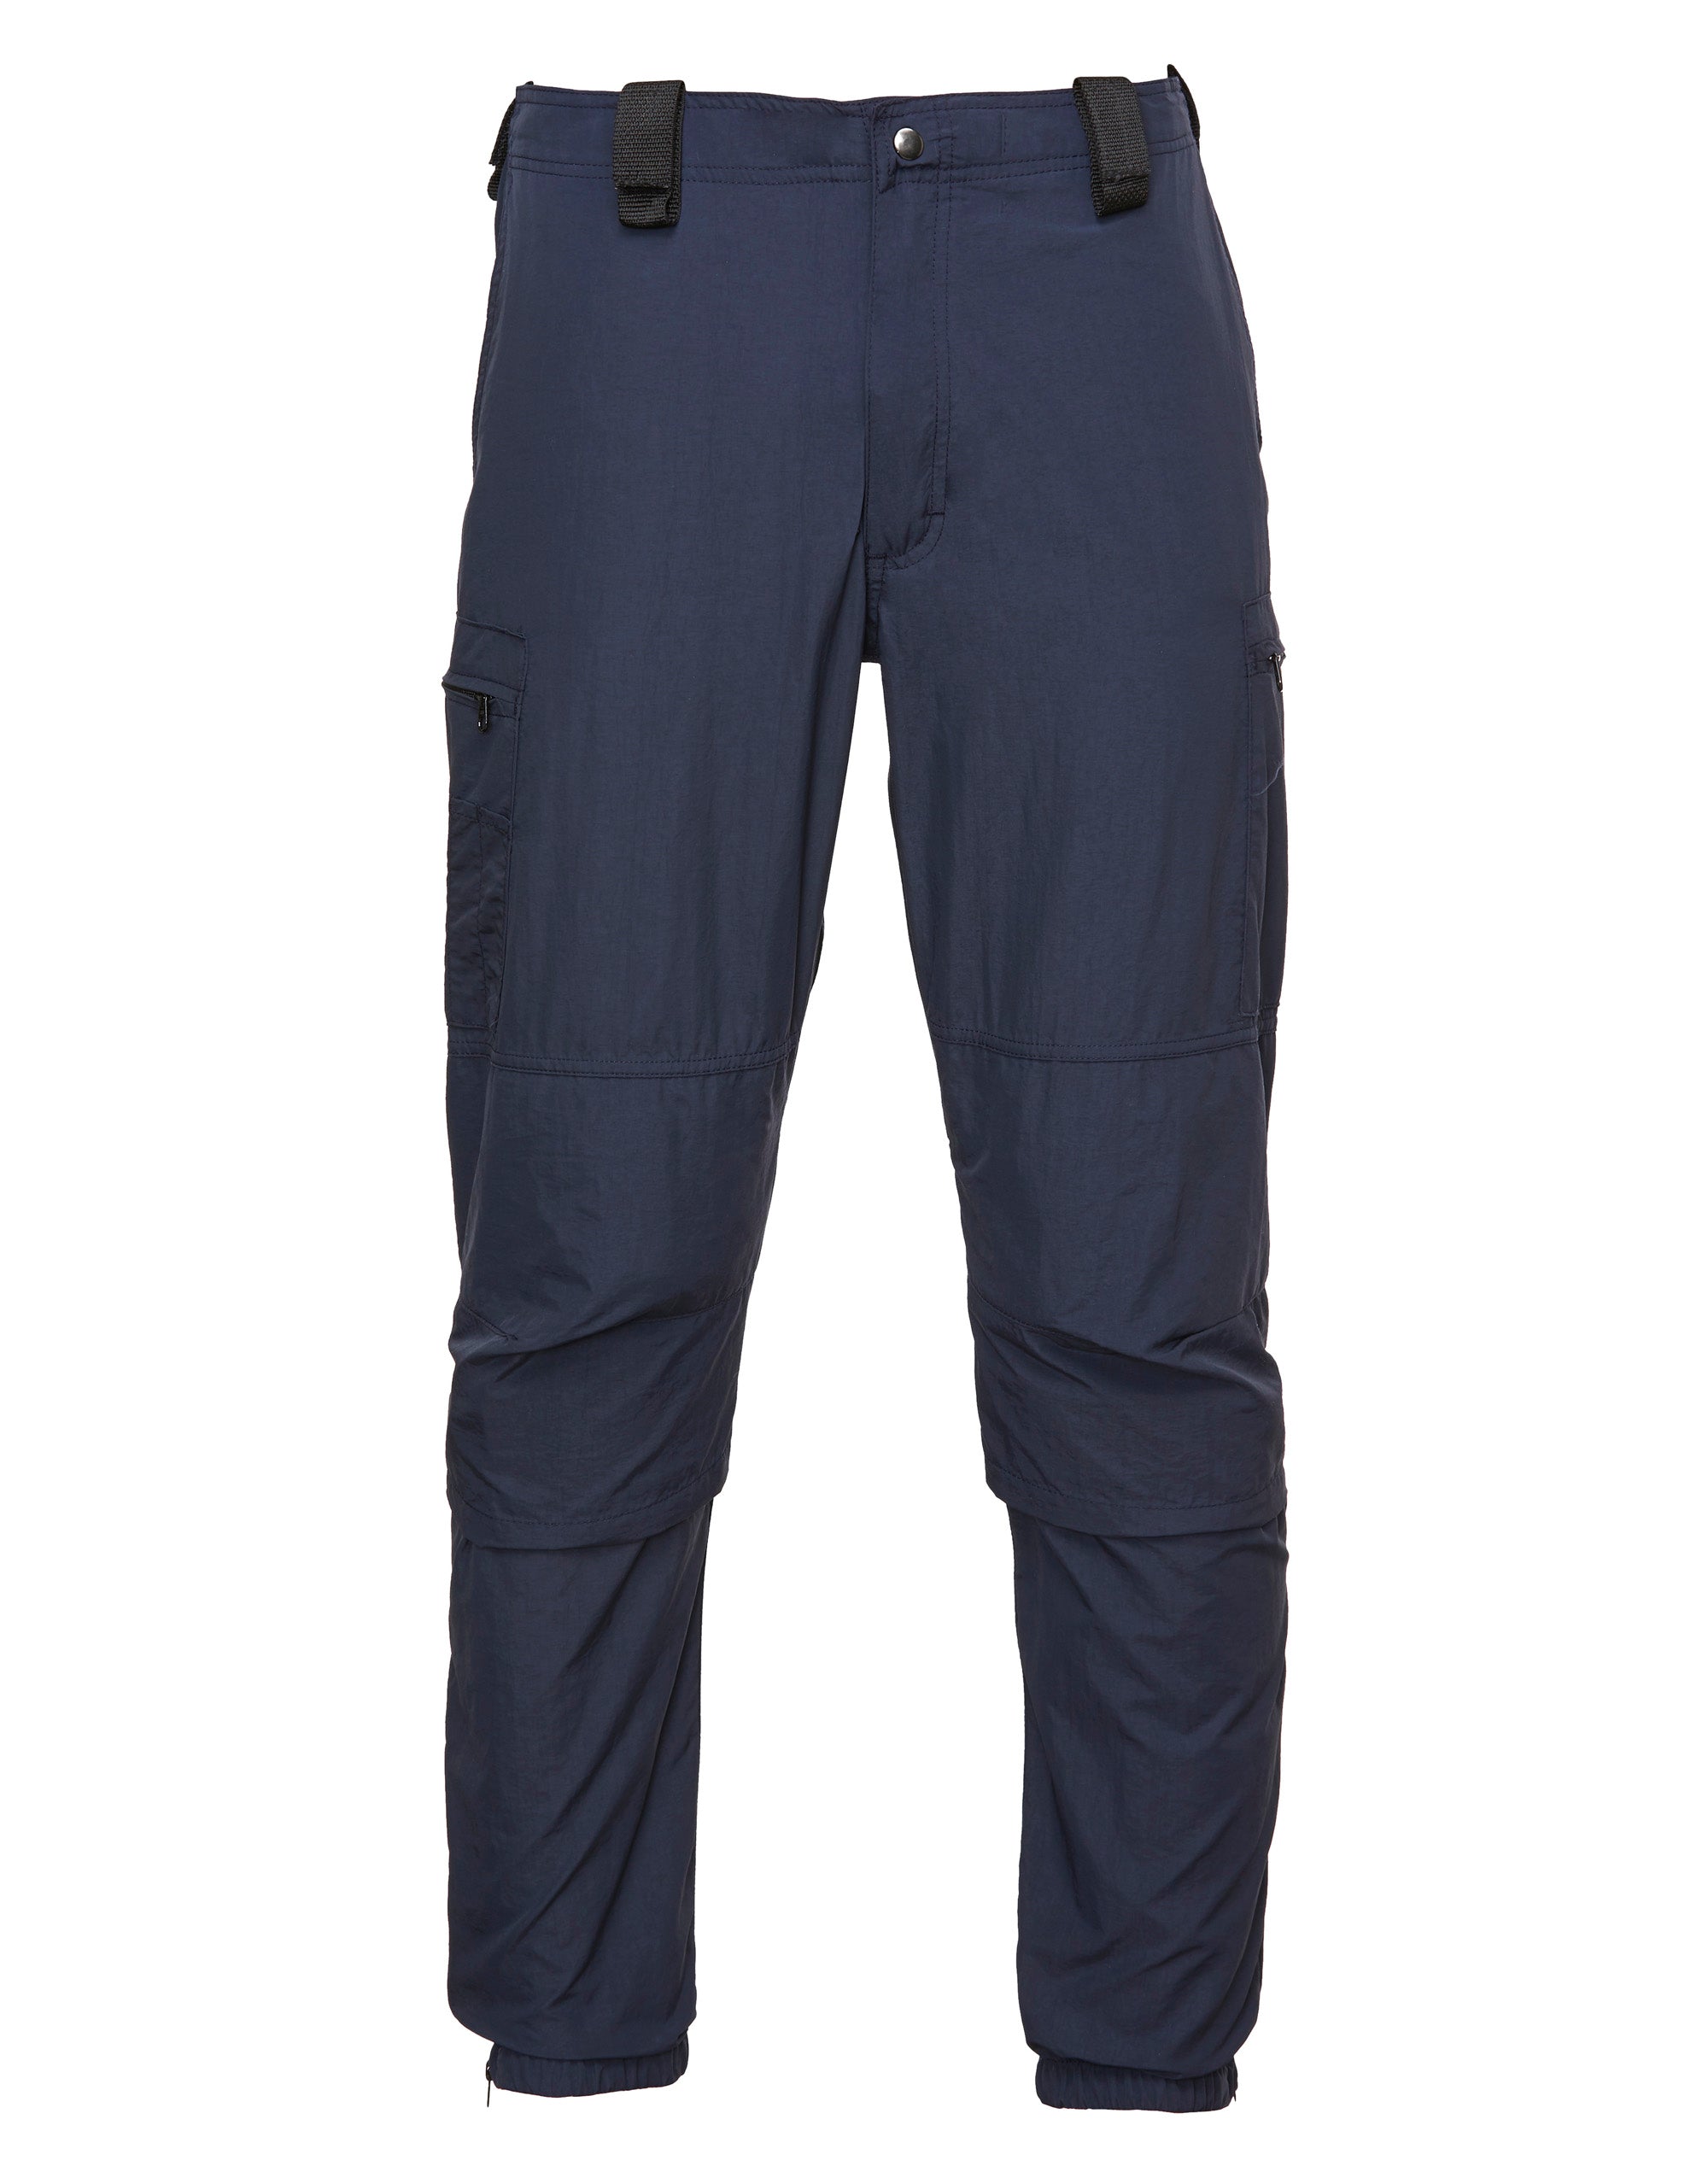 2150 Classic Approach Pant